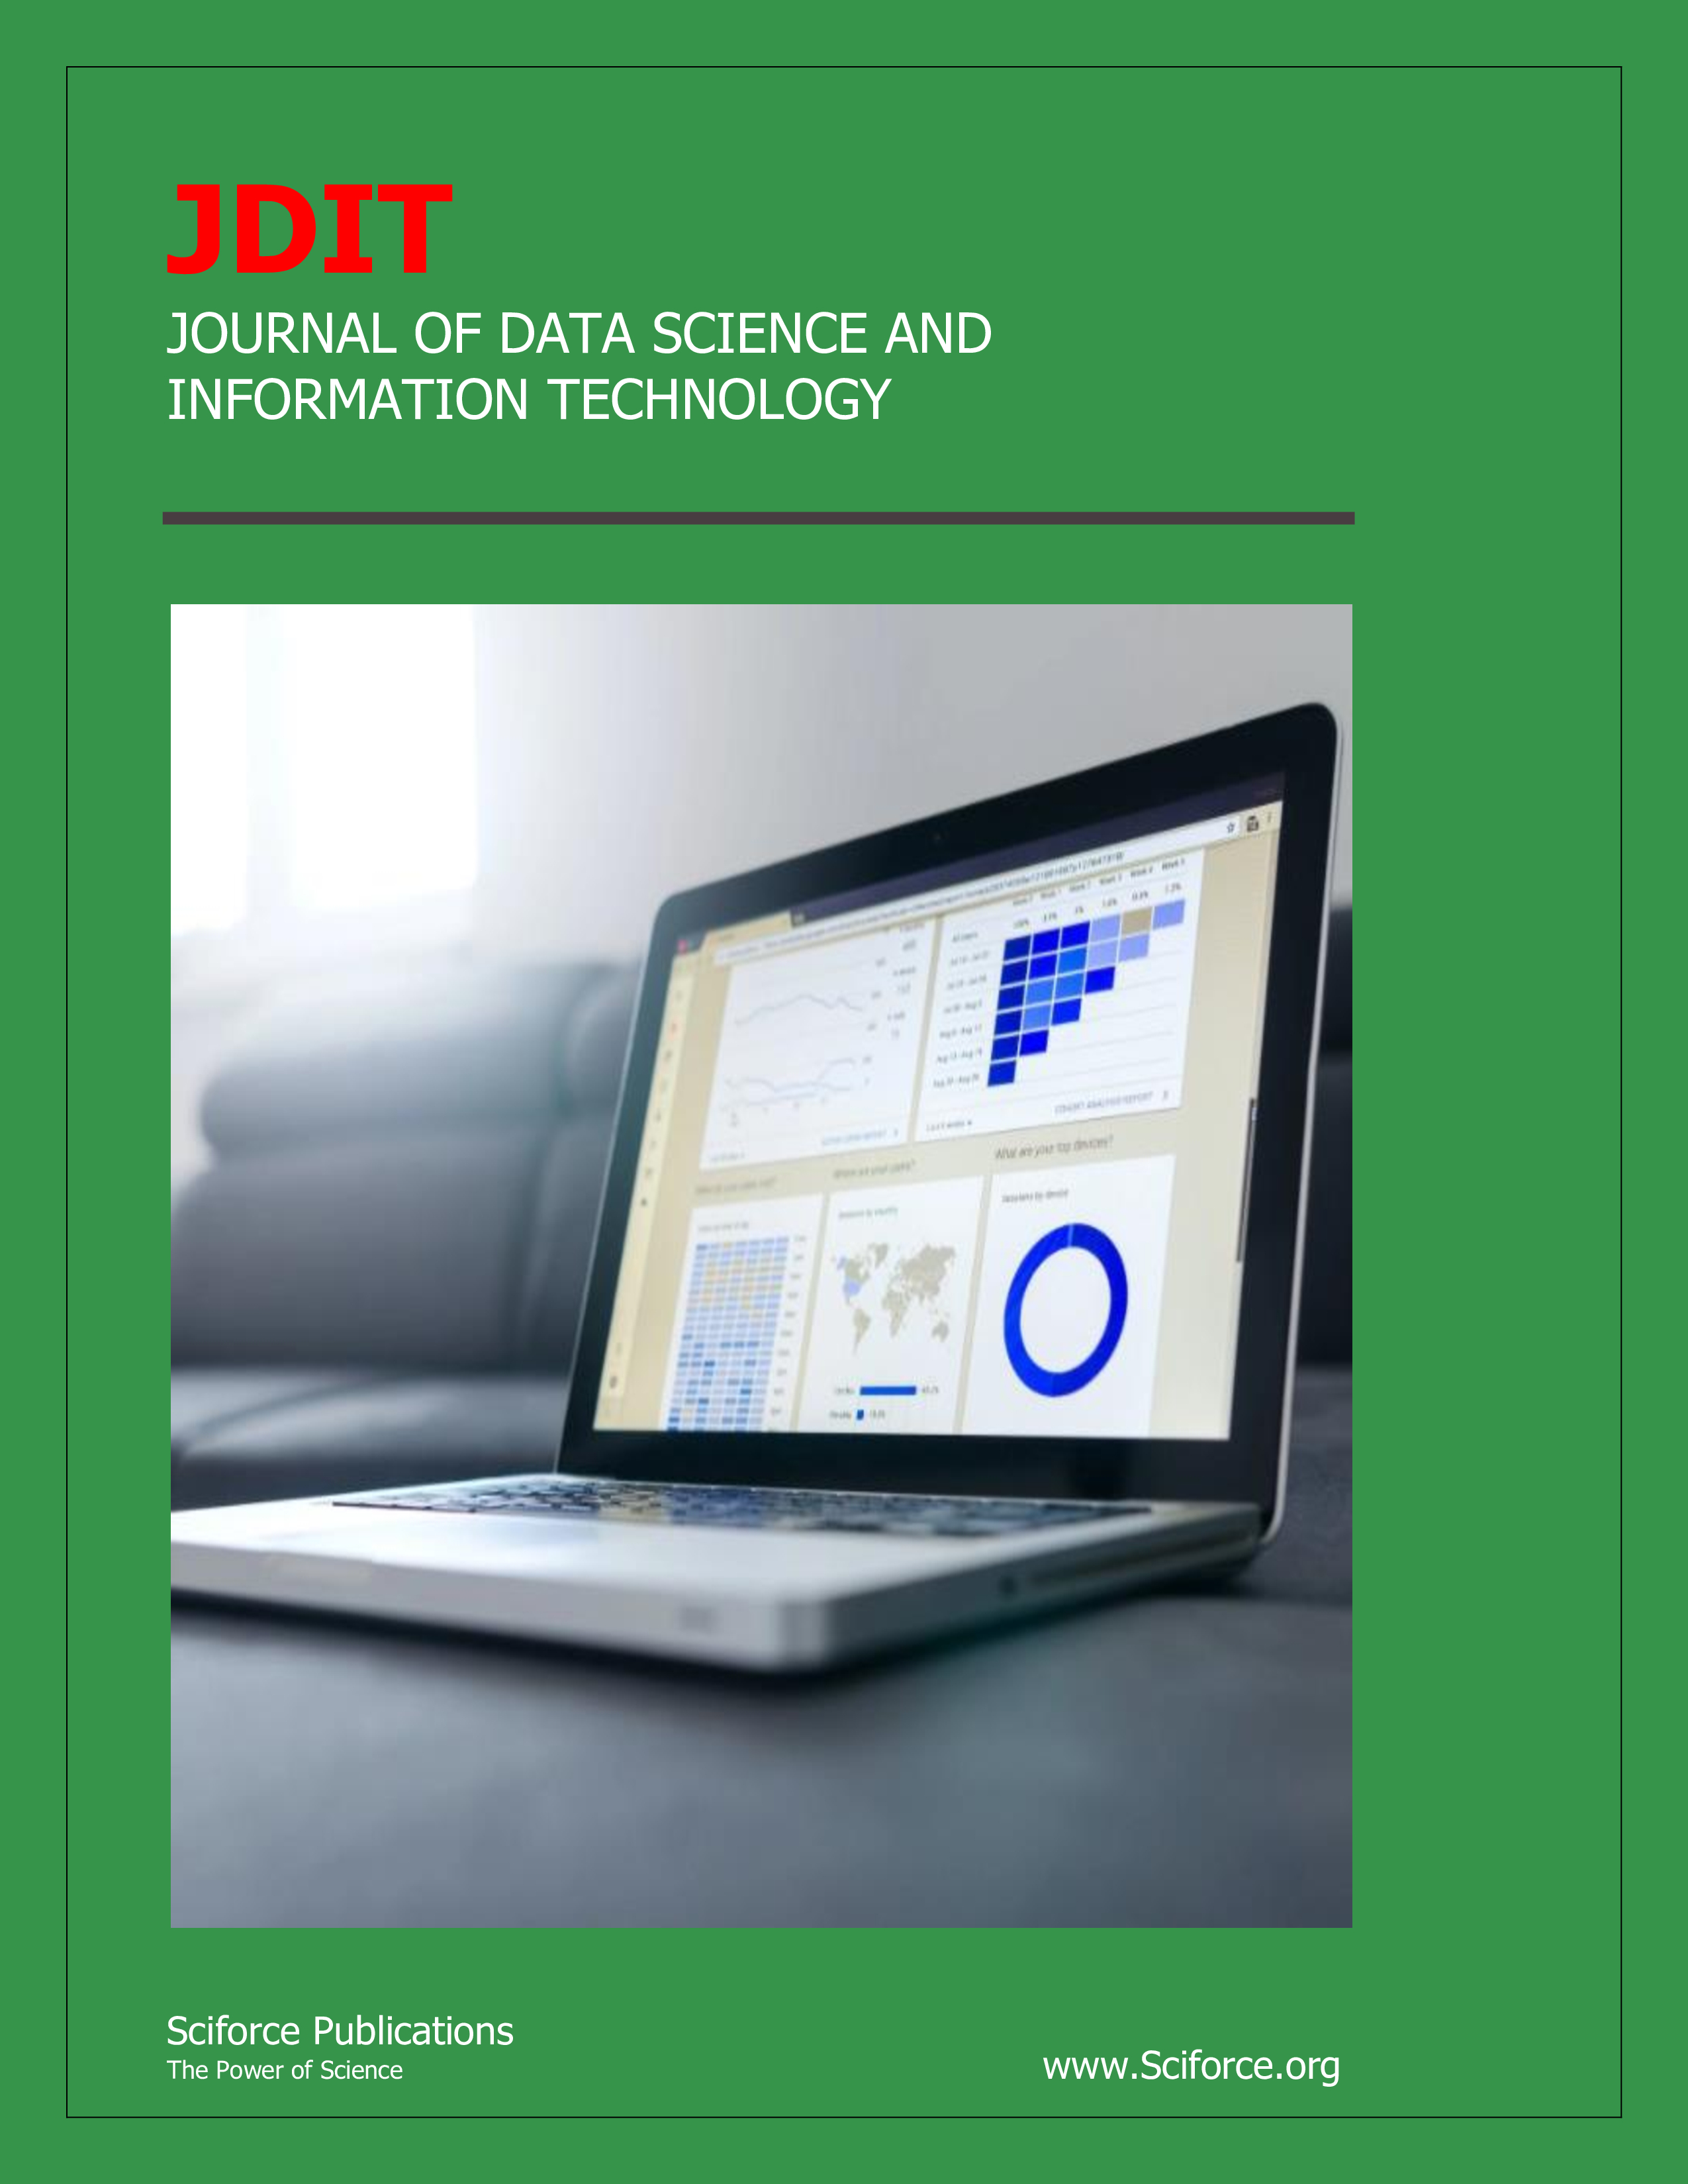 Journal of Data Science and Information Technology